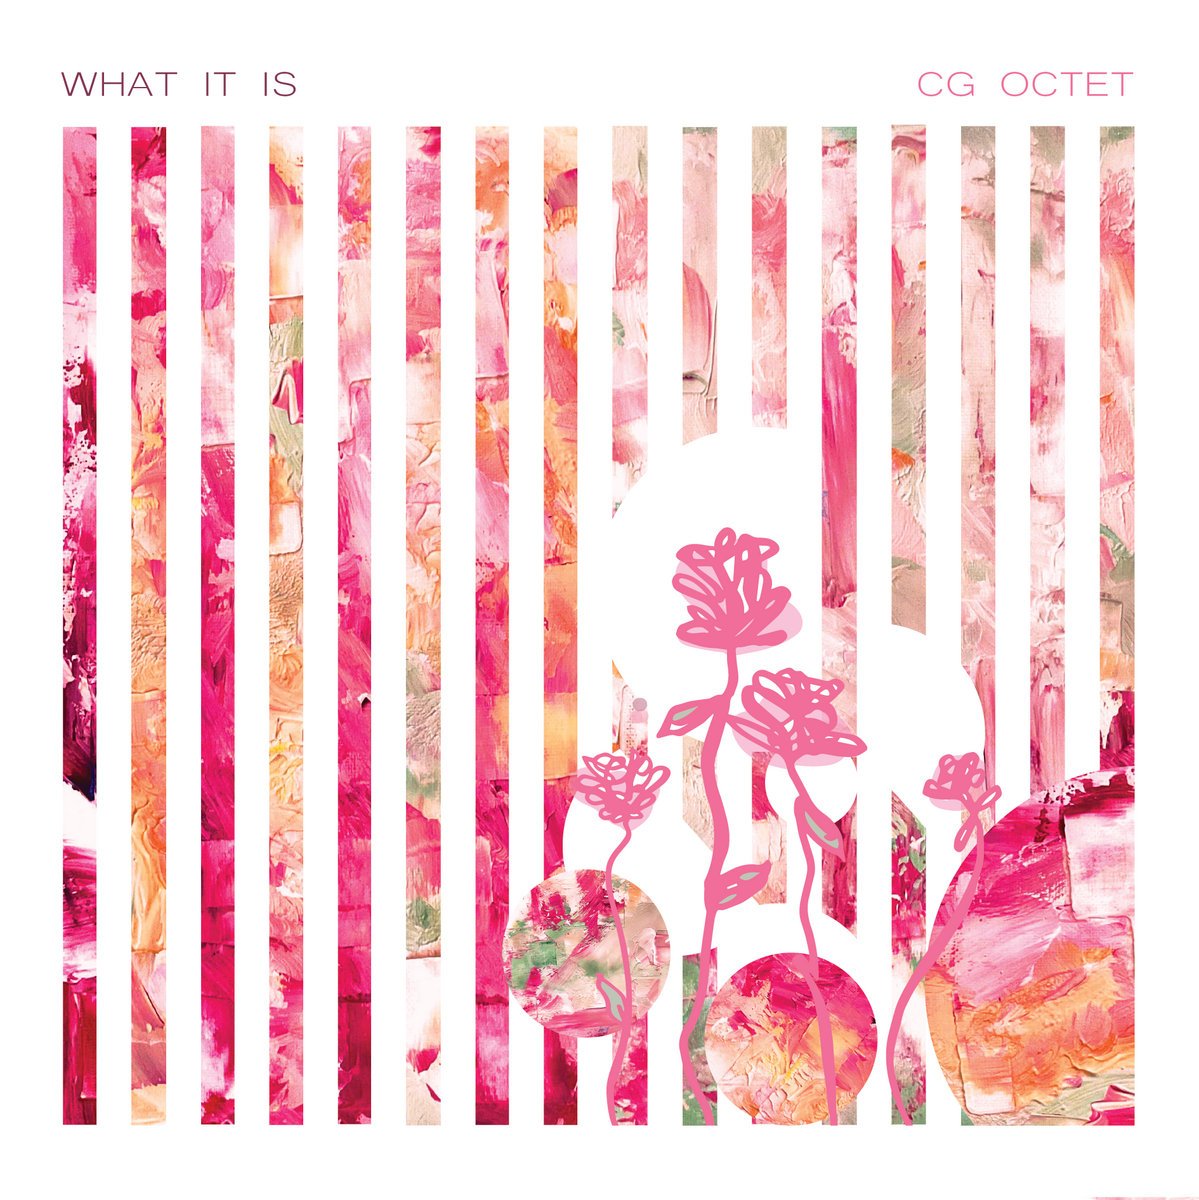 Christina Guala - "What It Is" [Recorded, Mixed & Mastered (JP)]